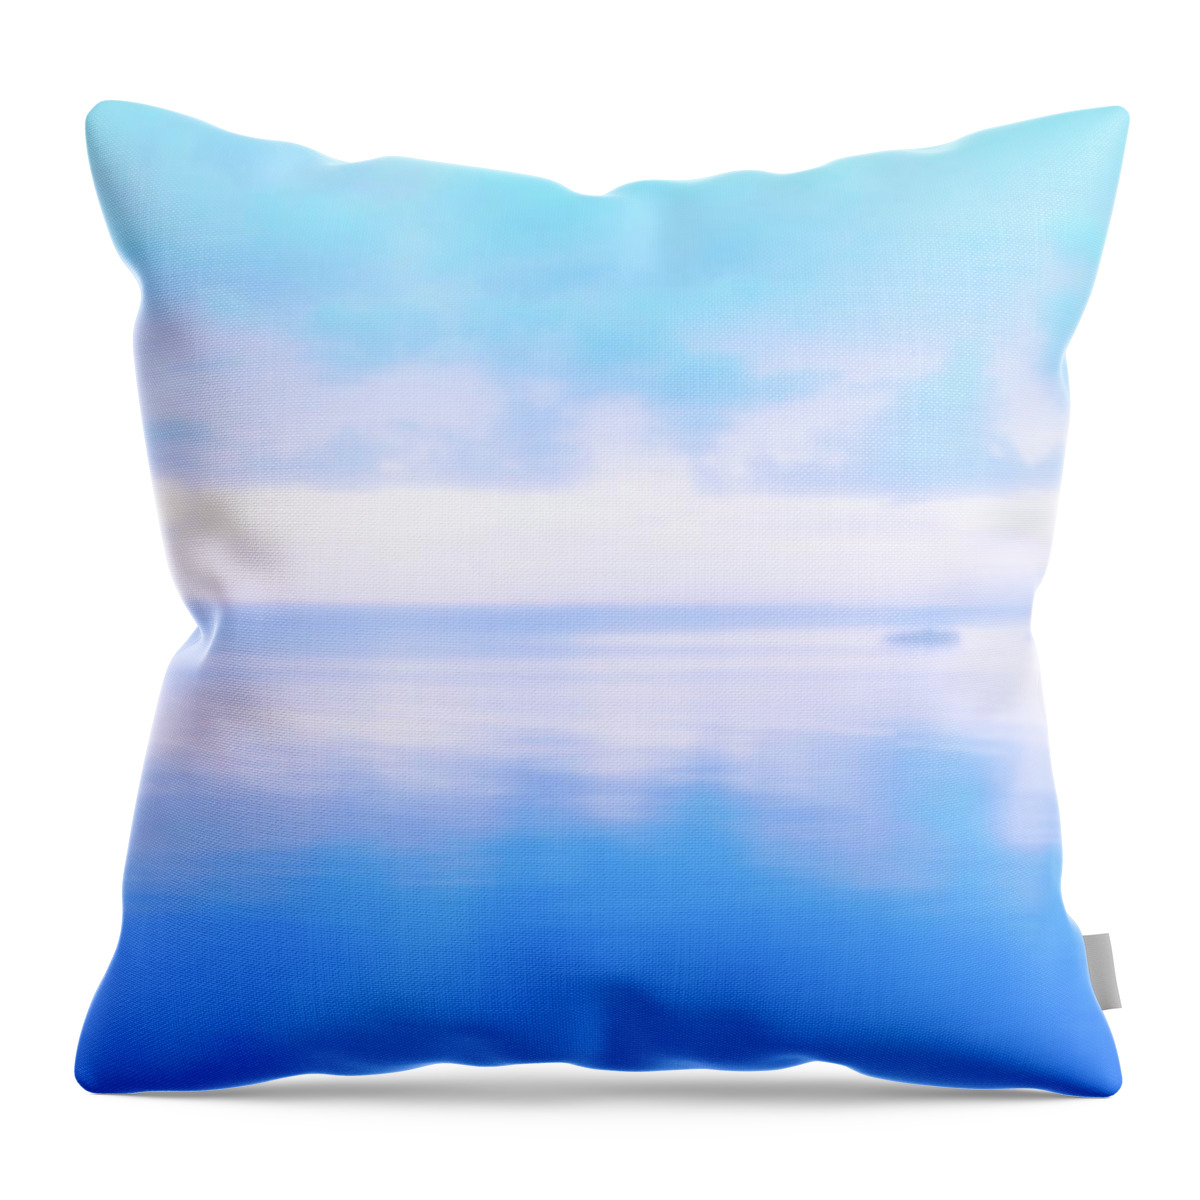 Morning By The Sea Throw Pillow featuring the digital art Morning By the Sea by Randy Steele